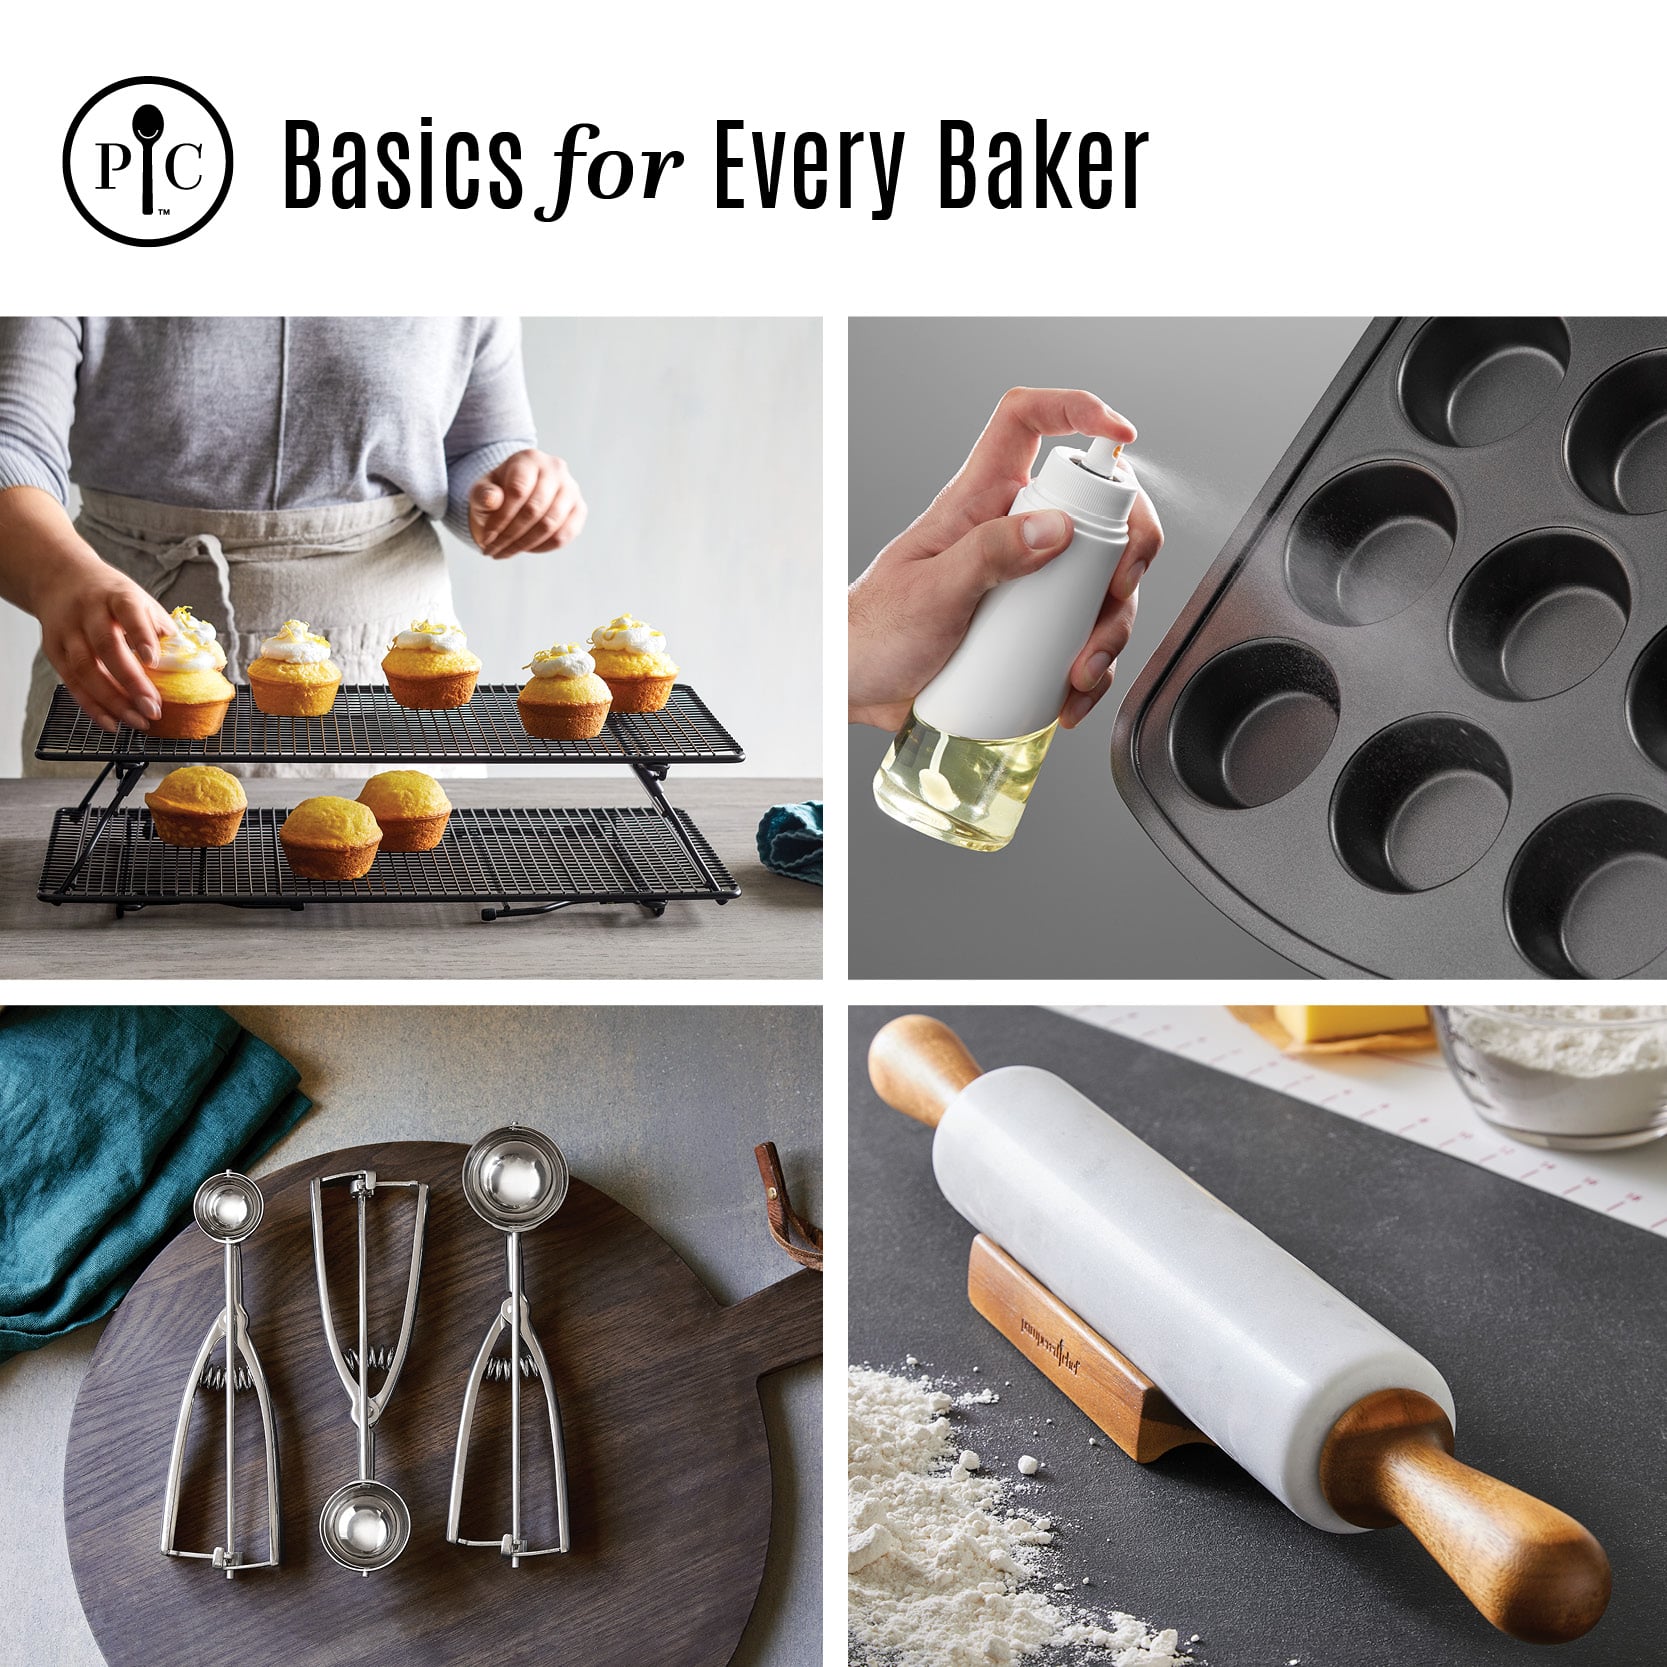 https://eadn-wc01-7182175.nxedge.io/wp-content/uploads/2022/08/post-product-basics-for-every-baker-usca.jpg